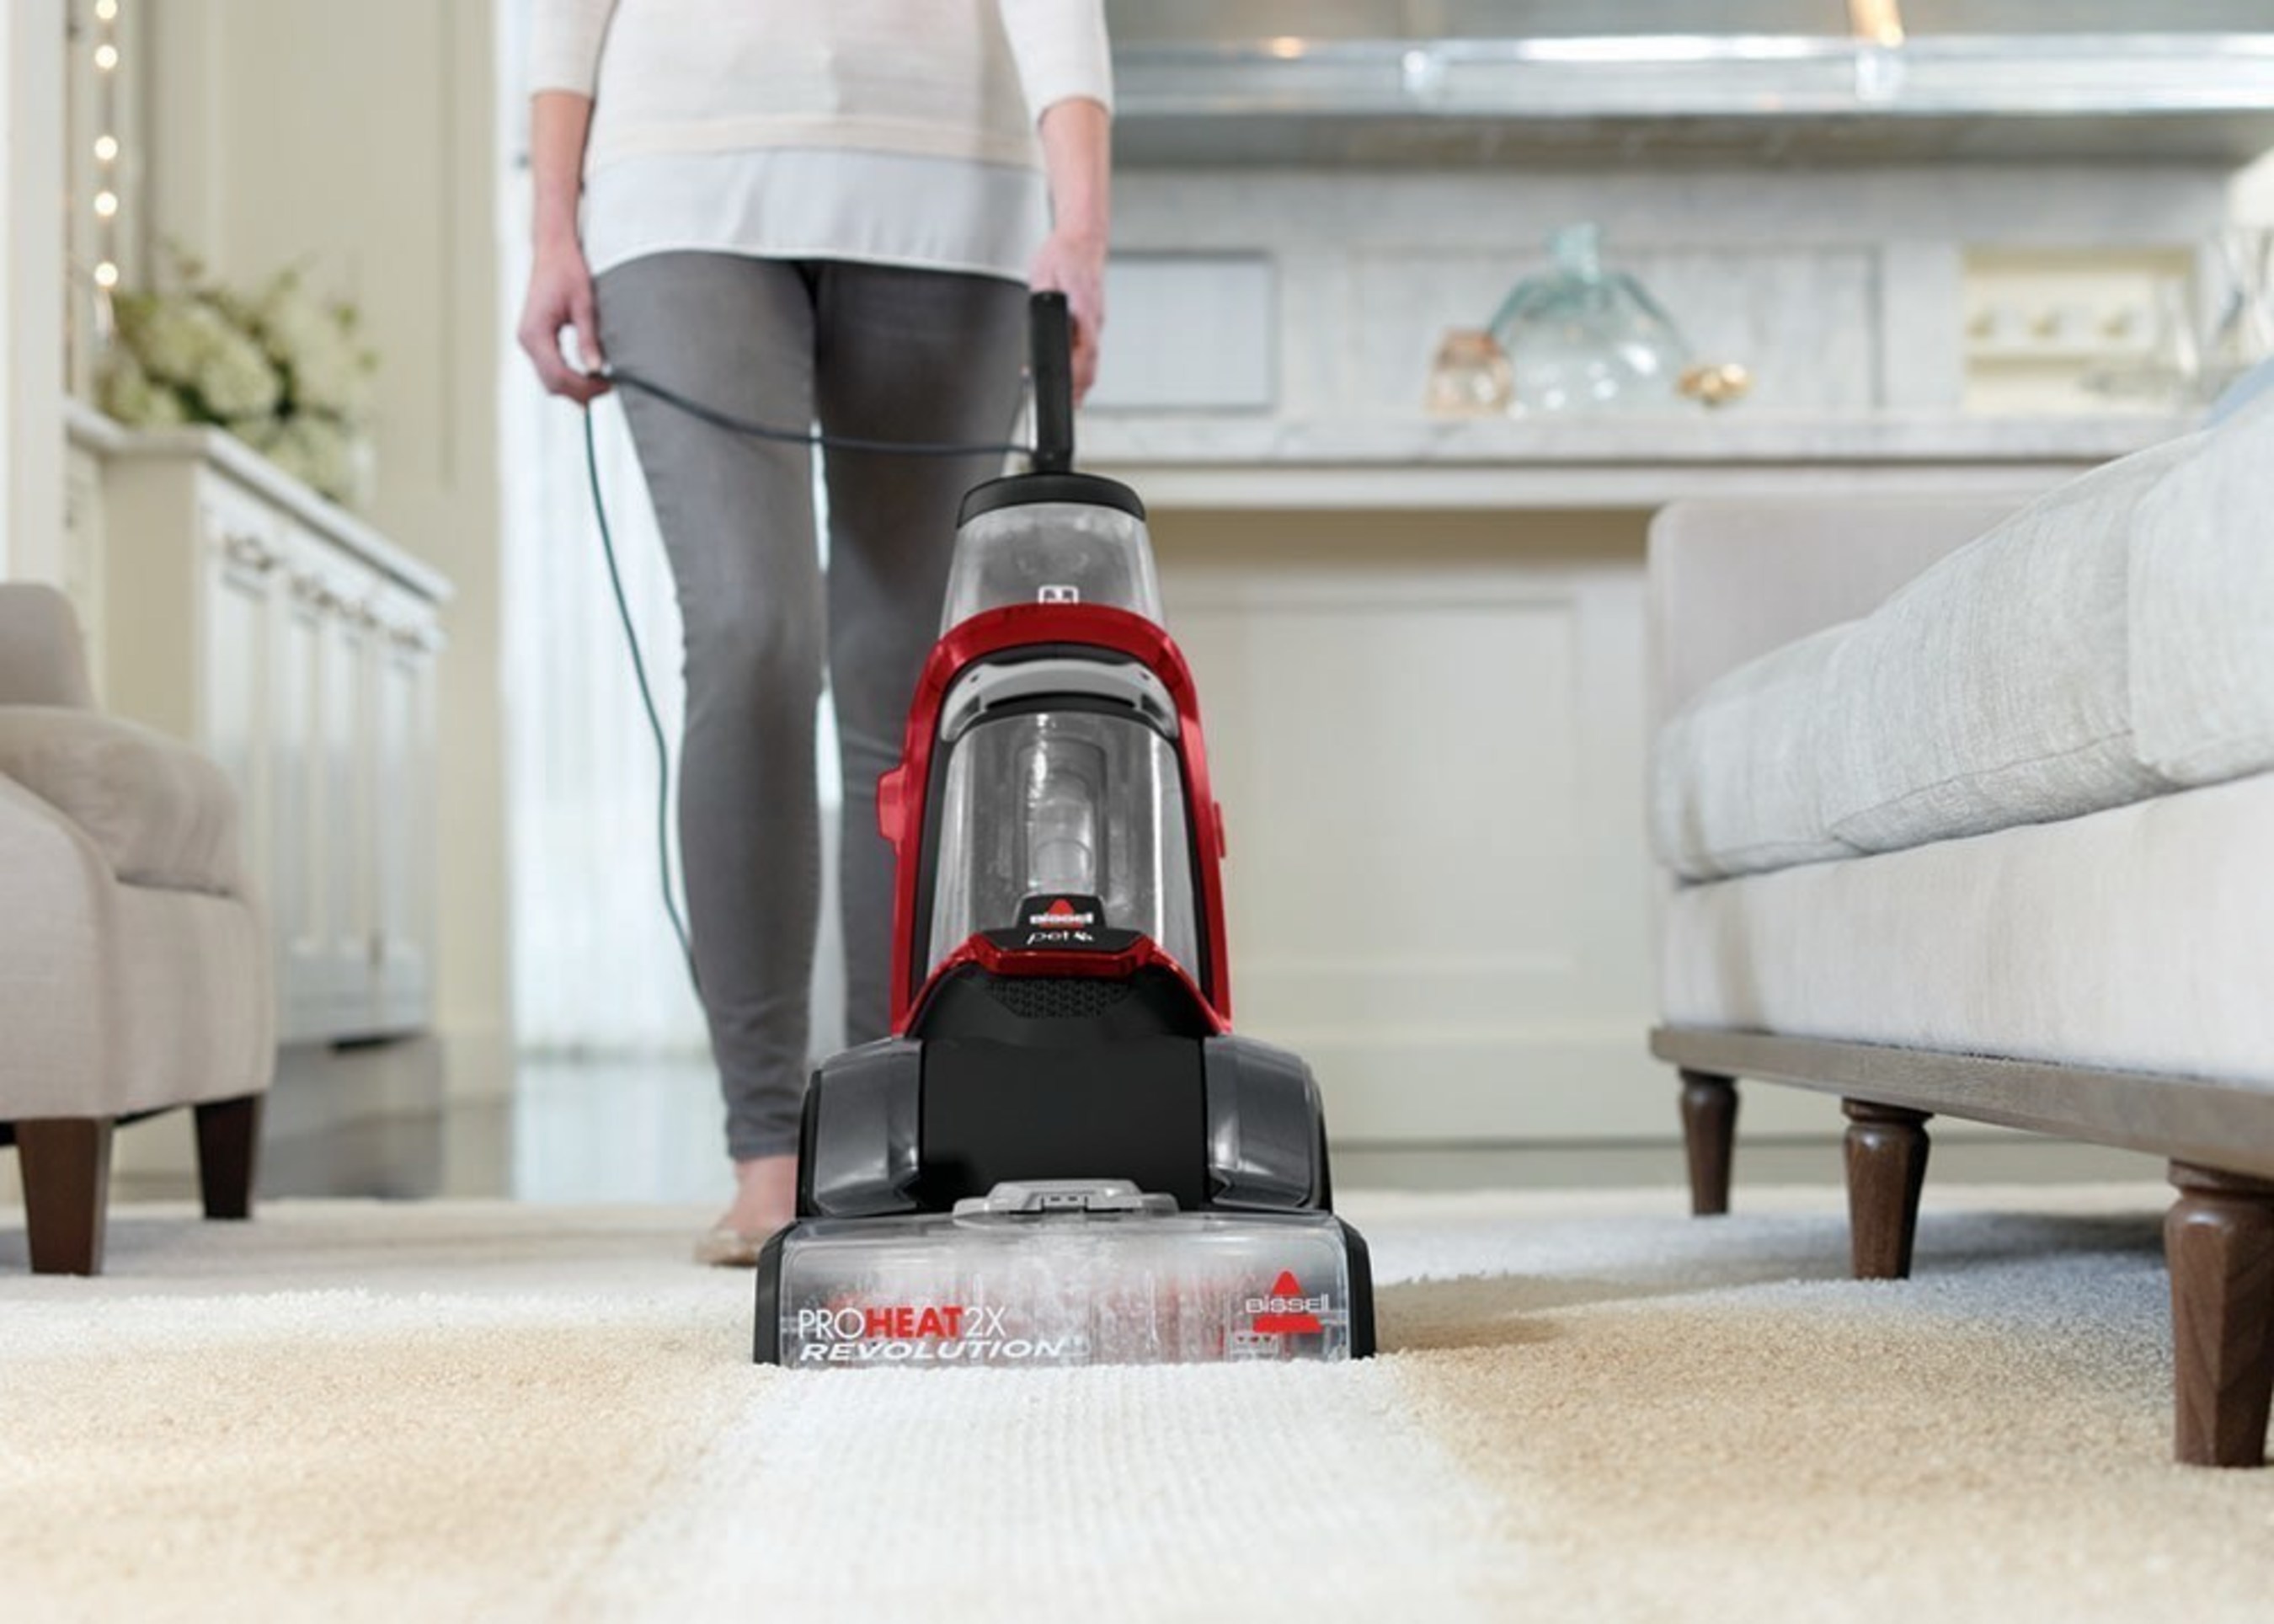 BISSELL introduces the new ProHeat 2X(R) Revolution(TM) Pet, which makes deep cleaning carpet as easy as vacuuming so users can rest assured that their carpets are clean and odor-causing bacteria is controlled, when using BISSELL Deep Clean + Antibacterial formula.